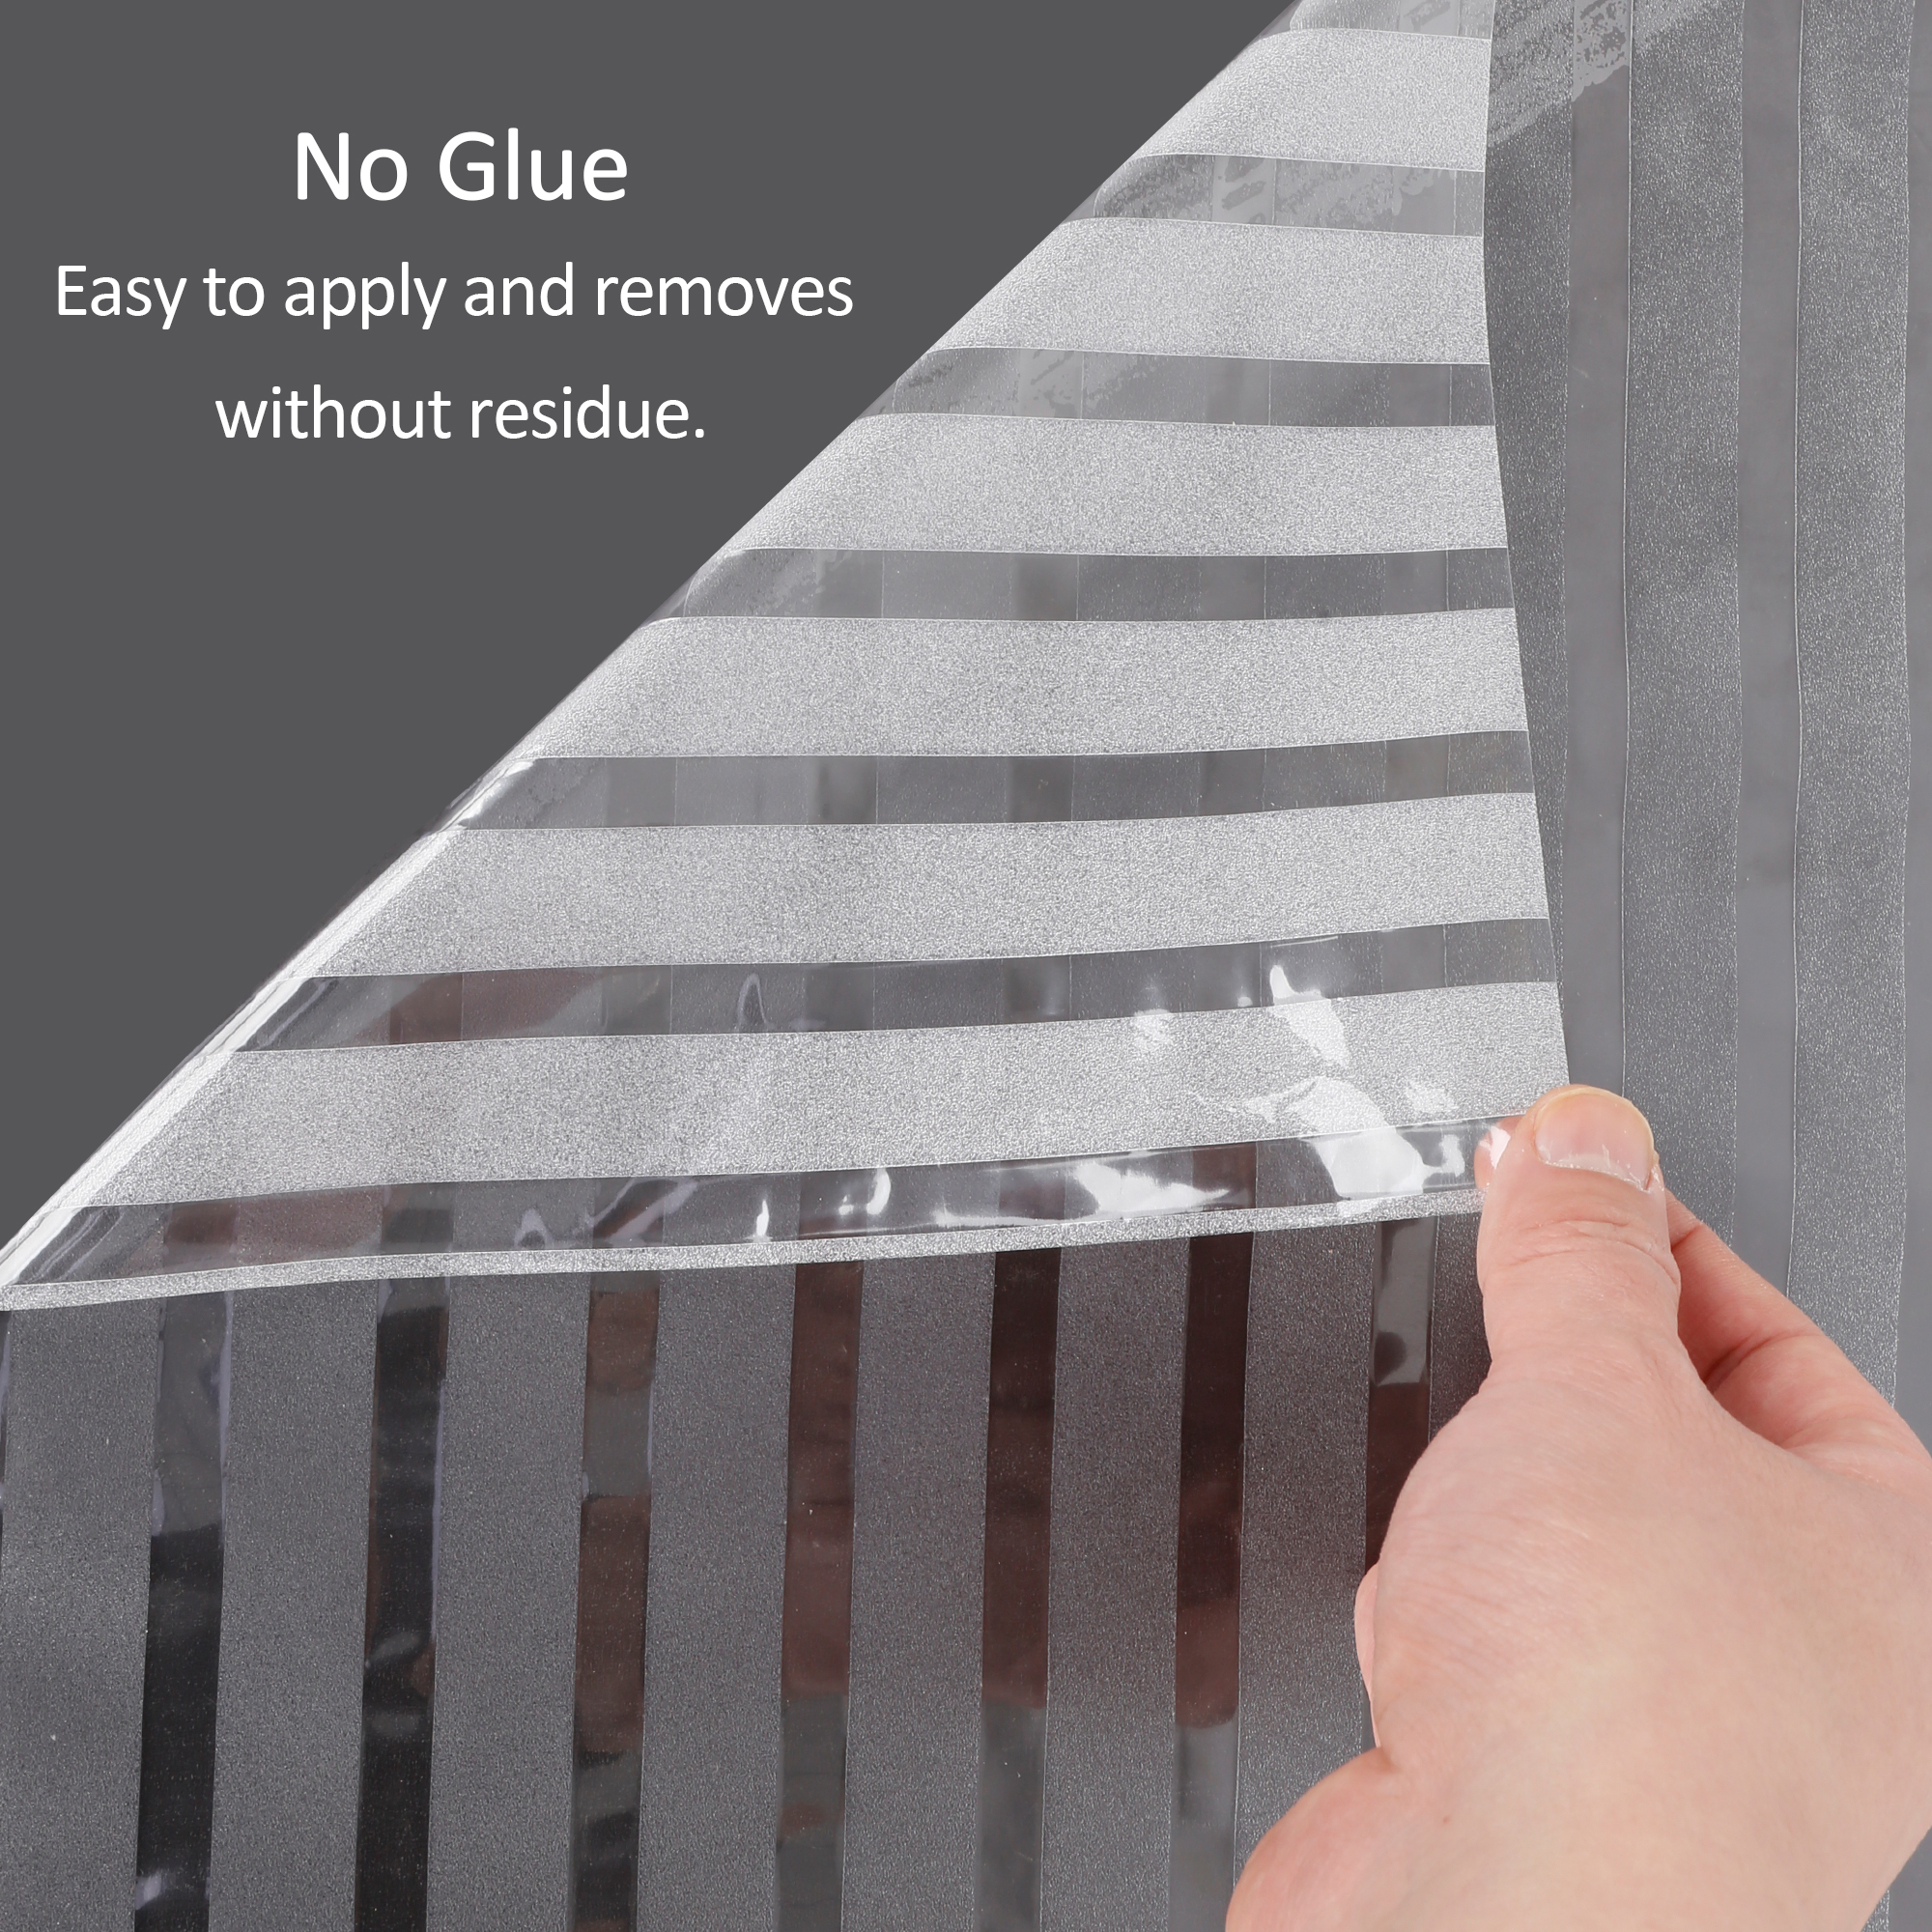 Static cling window vinyl, easy to apply and remove on glass and other  smooth surfaces